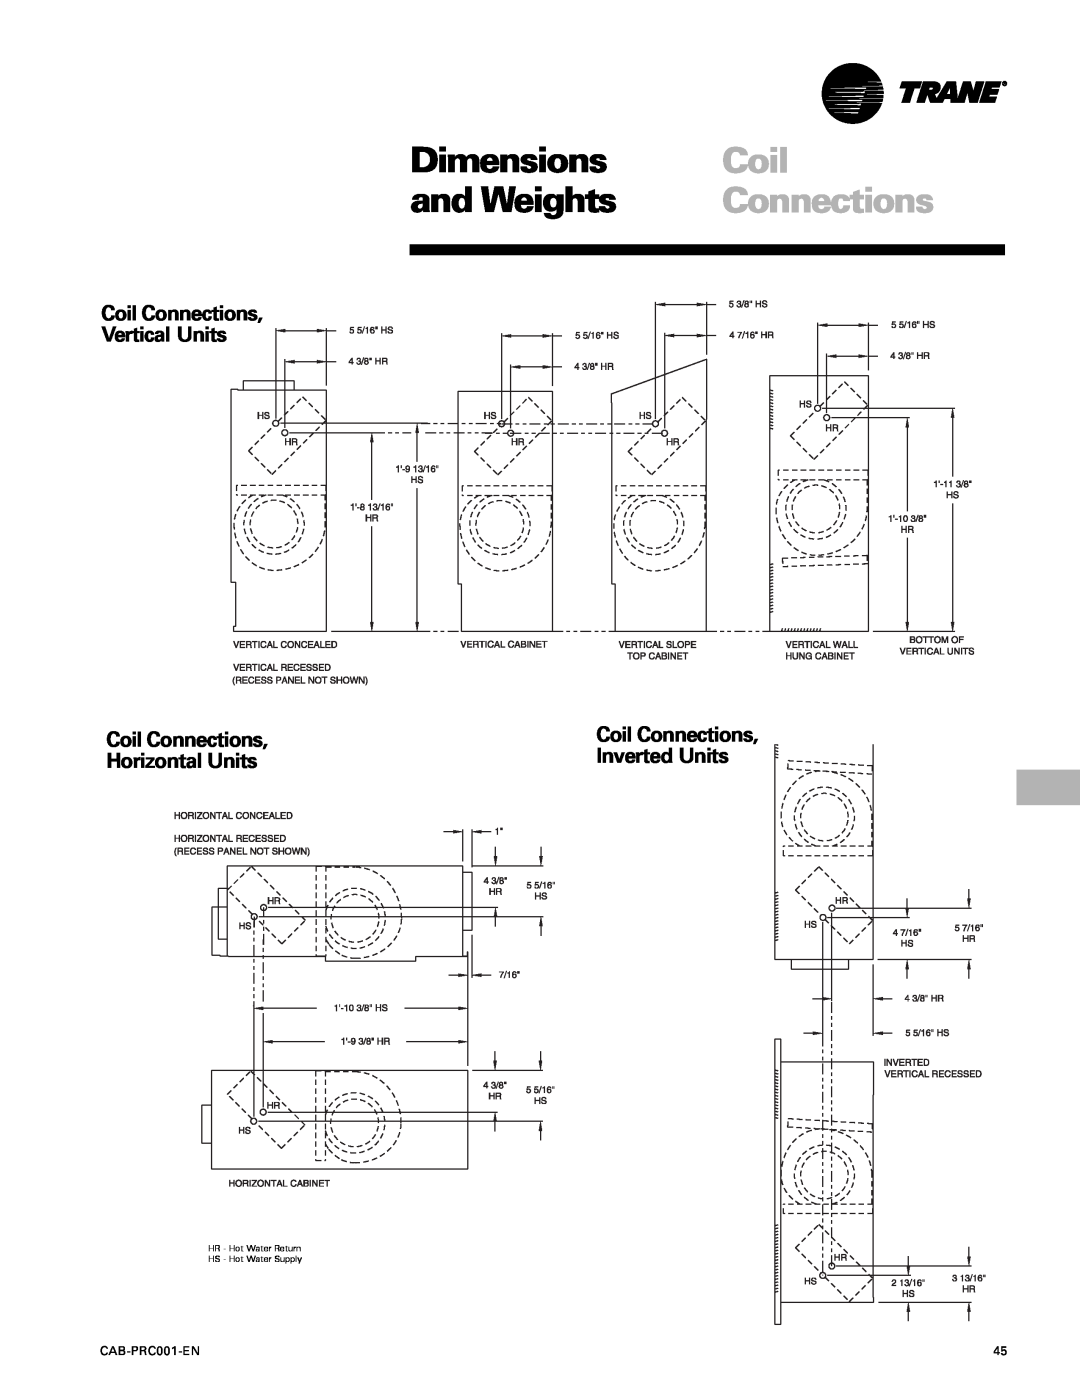 Trane CAB-PRC001-EN Dimensions, and Weights, Coil Connections Vertical Units, Horizontal Units, Inverted Units 